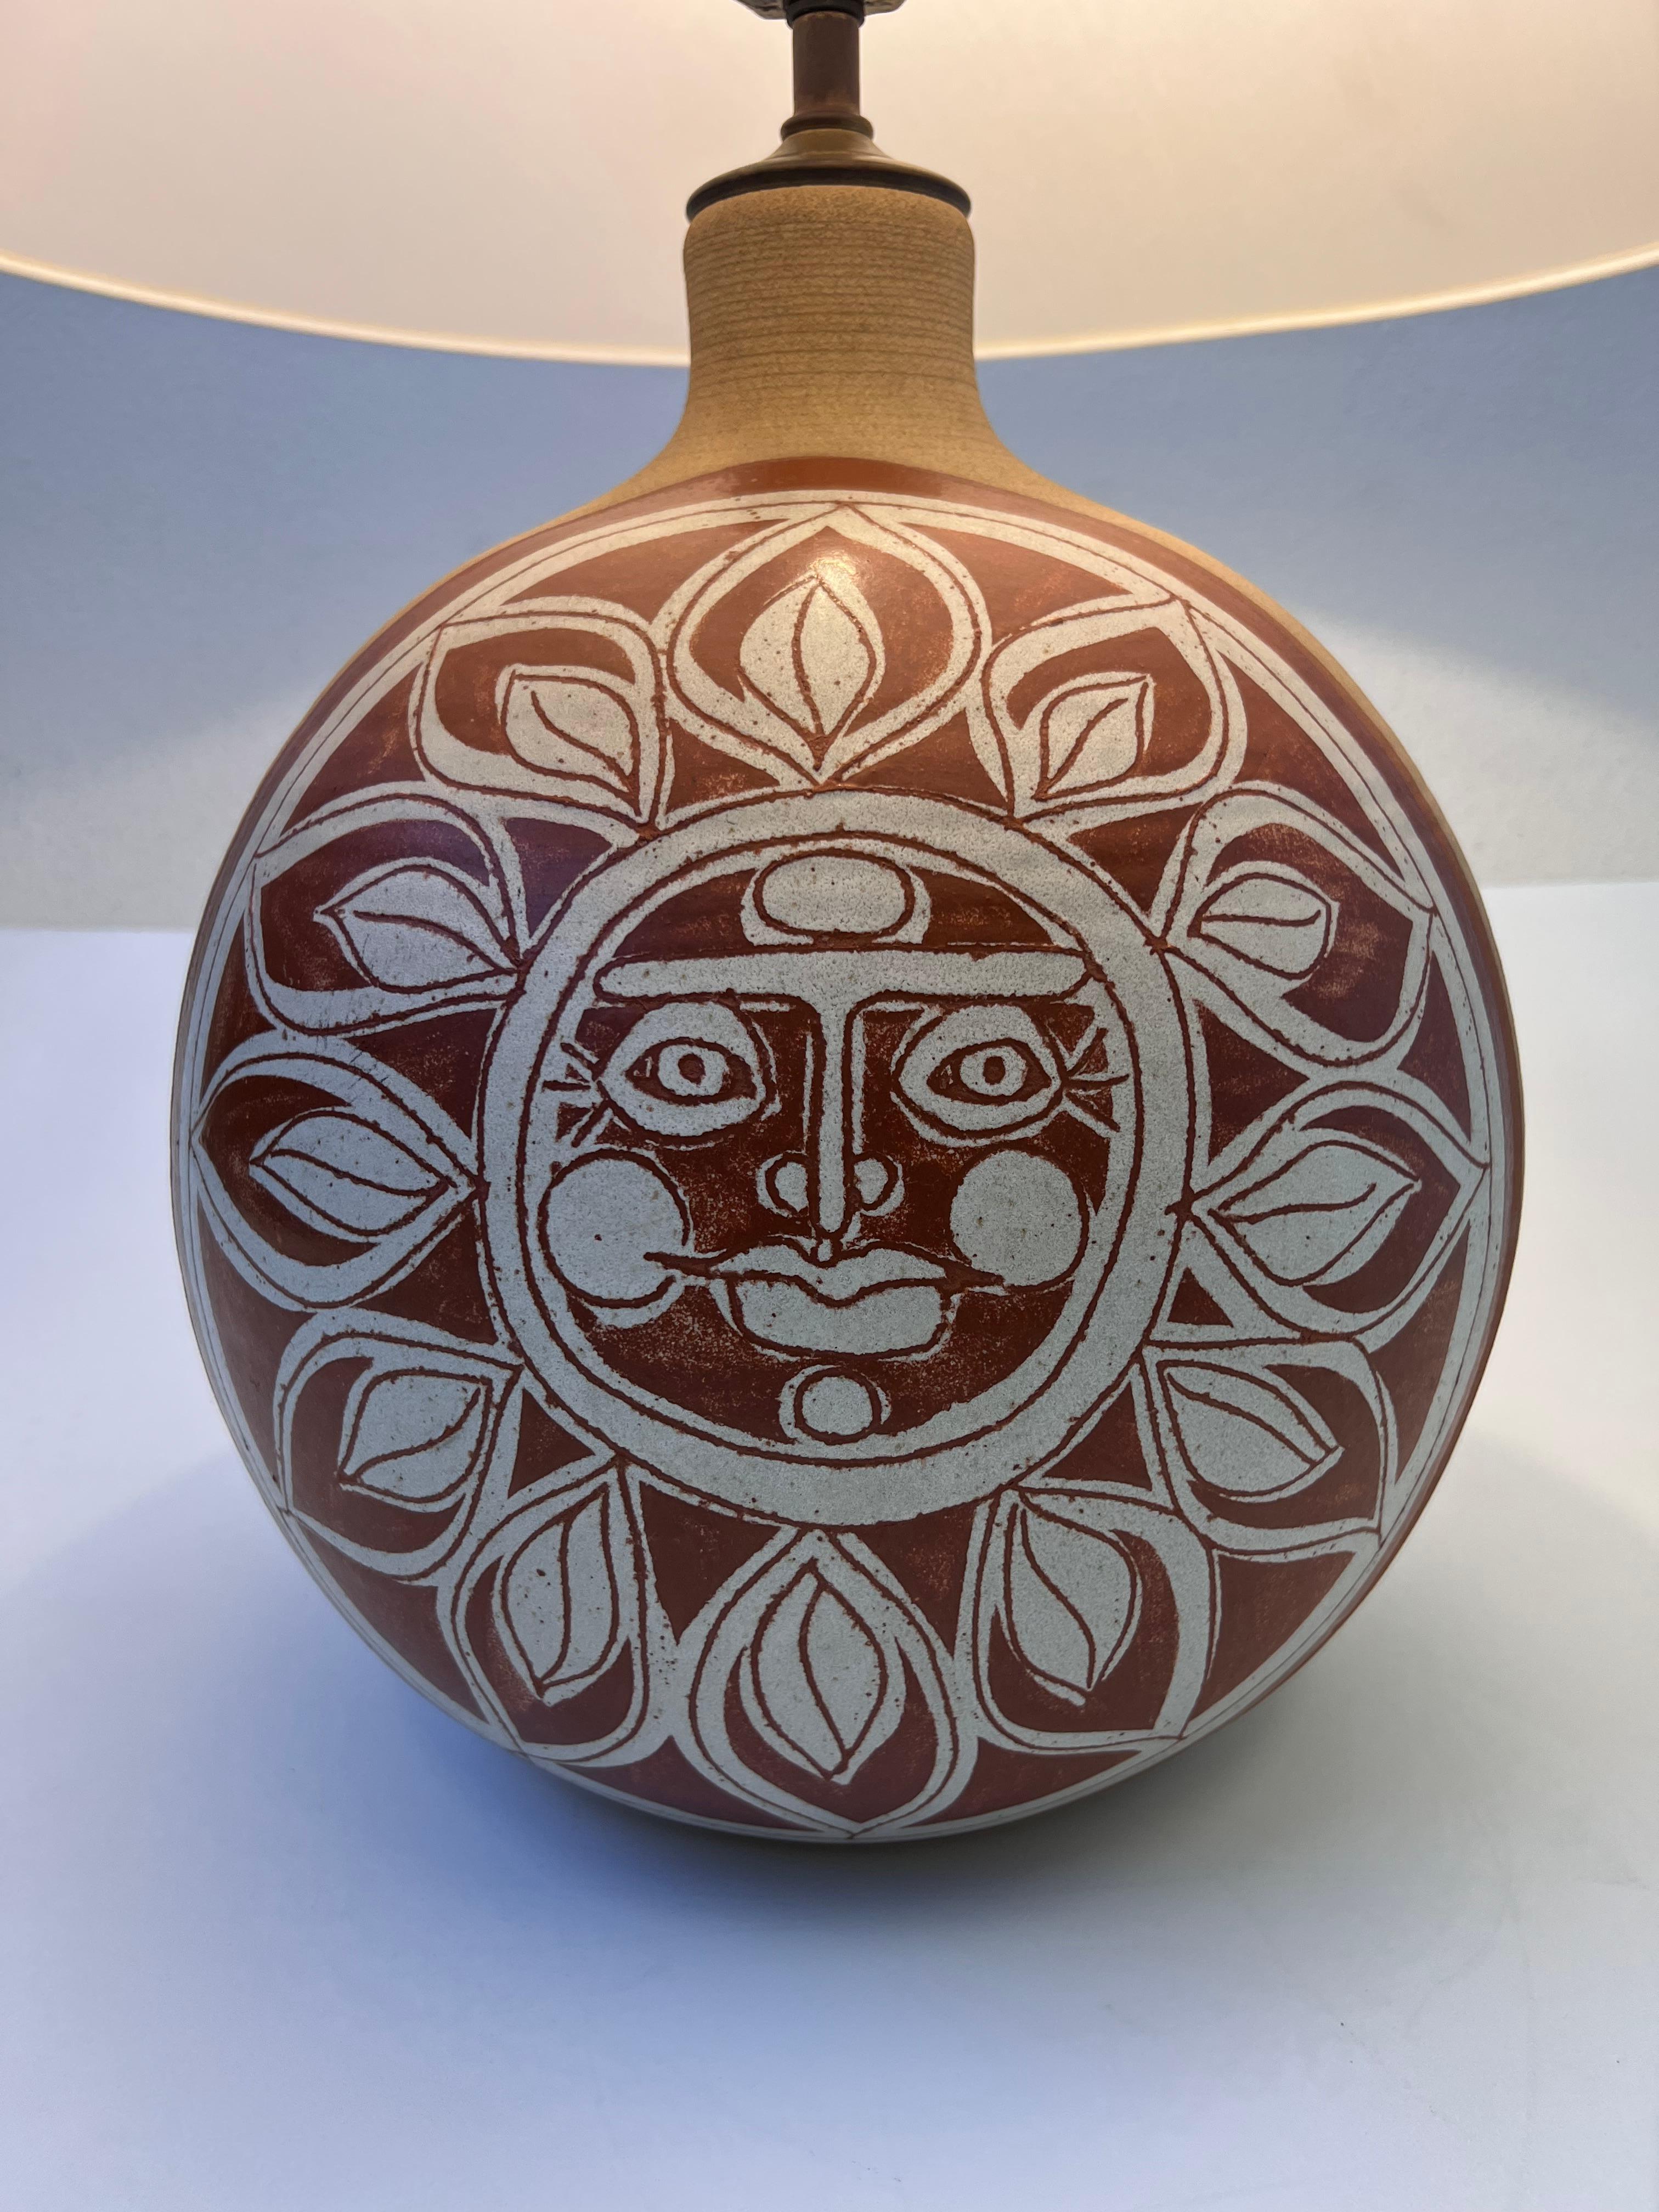 American Studio Ceramic Sun Face Table Lamp by Brown Brothers 